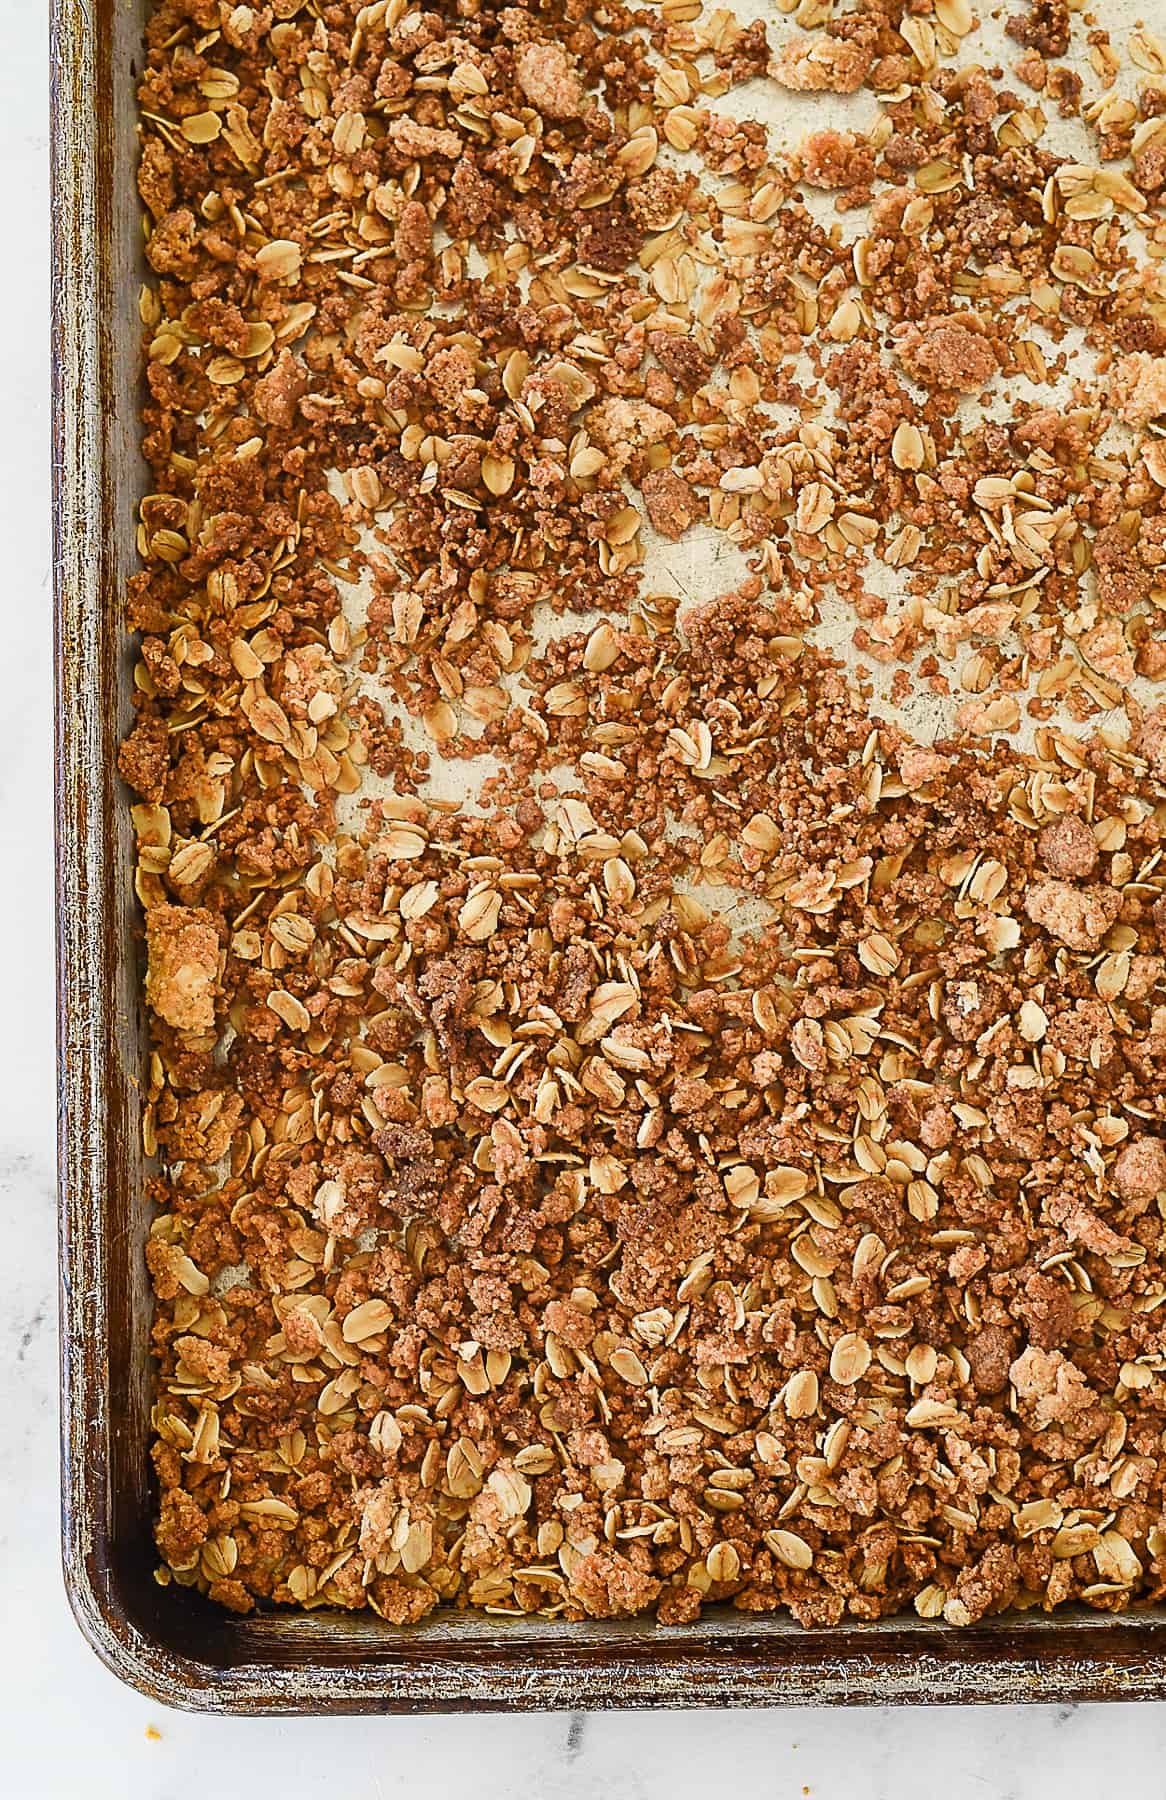 GOLDEN BROWN STREUSEL TOPPING